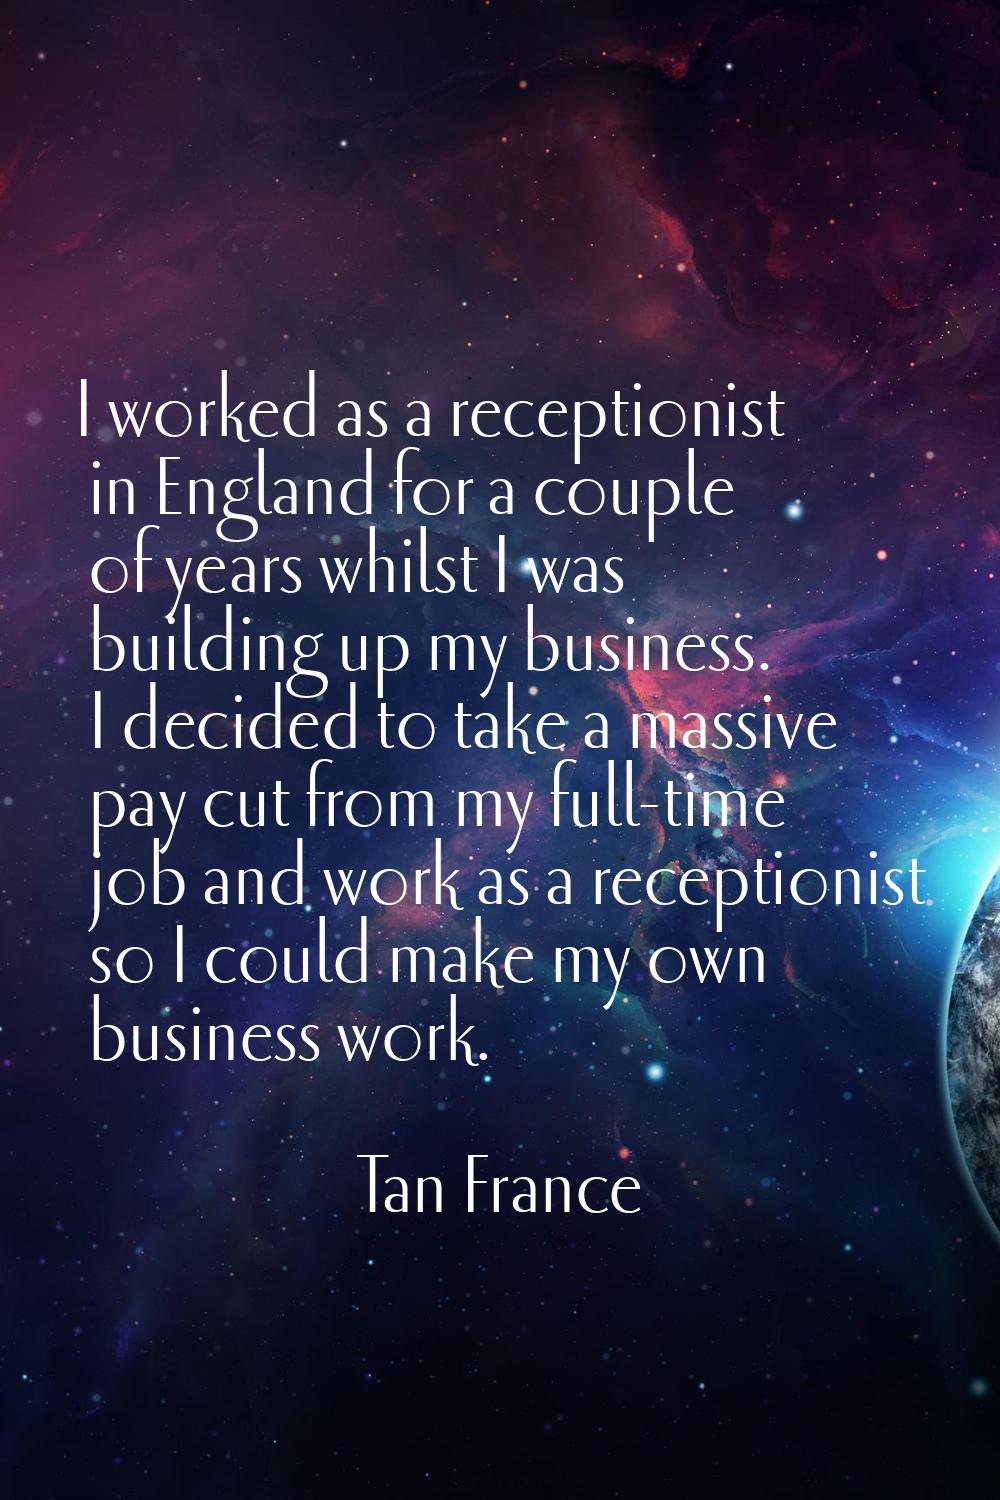 I worked as a receptionist in England for a couple of years whilst I was building up my business. I